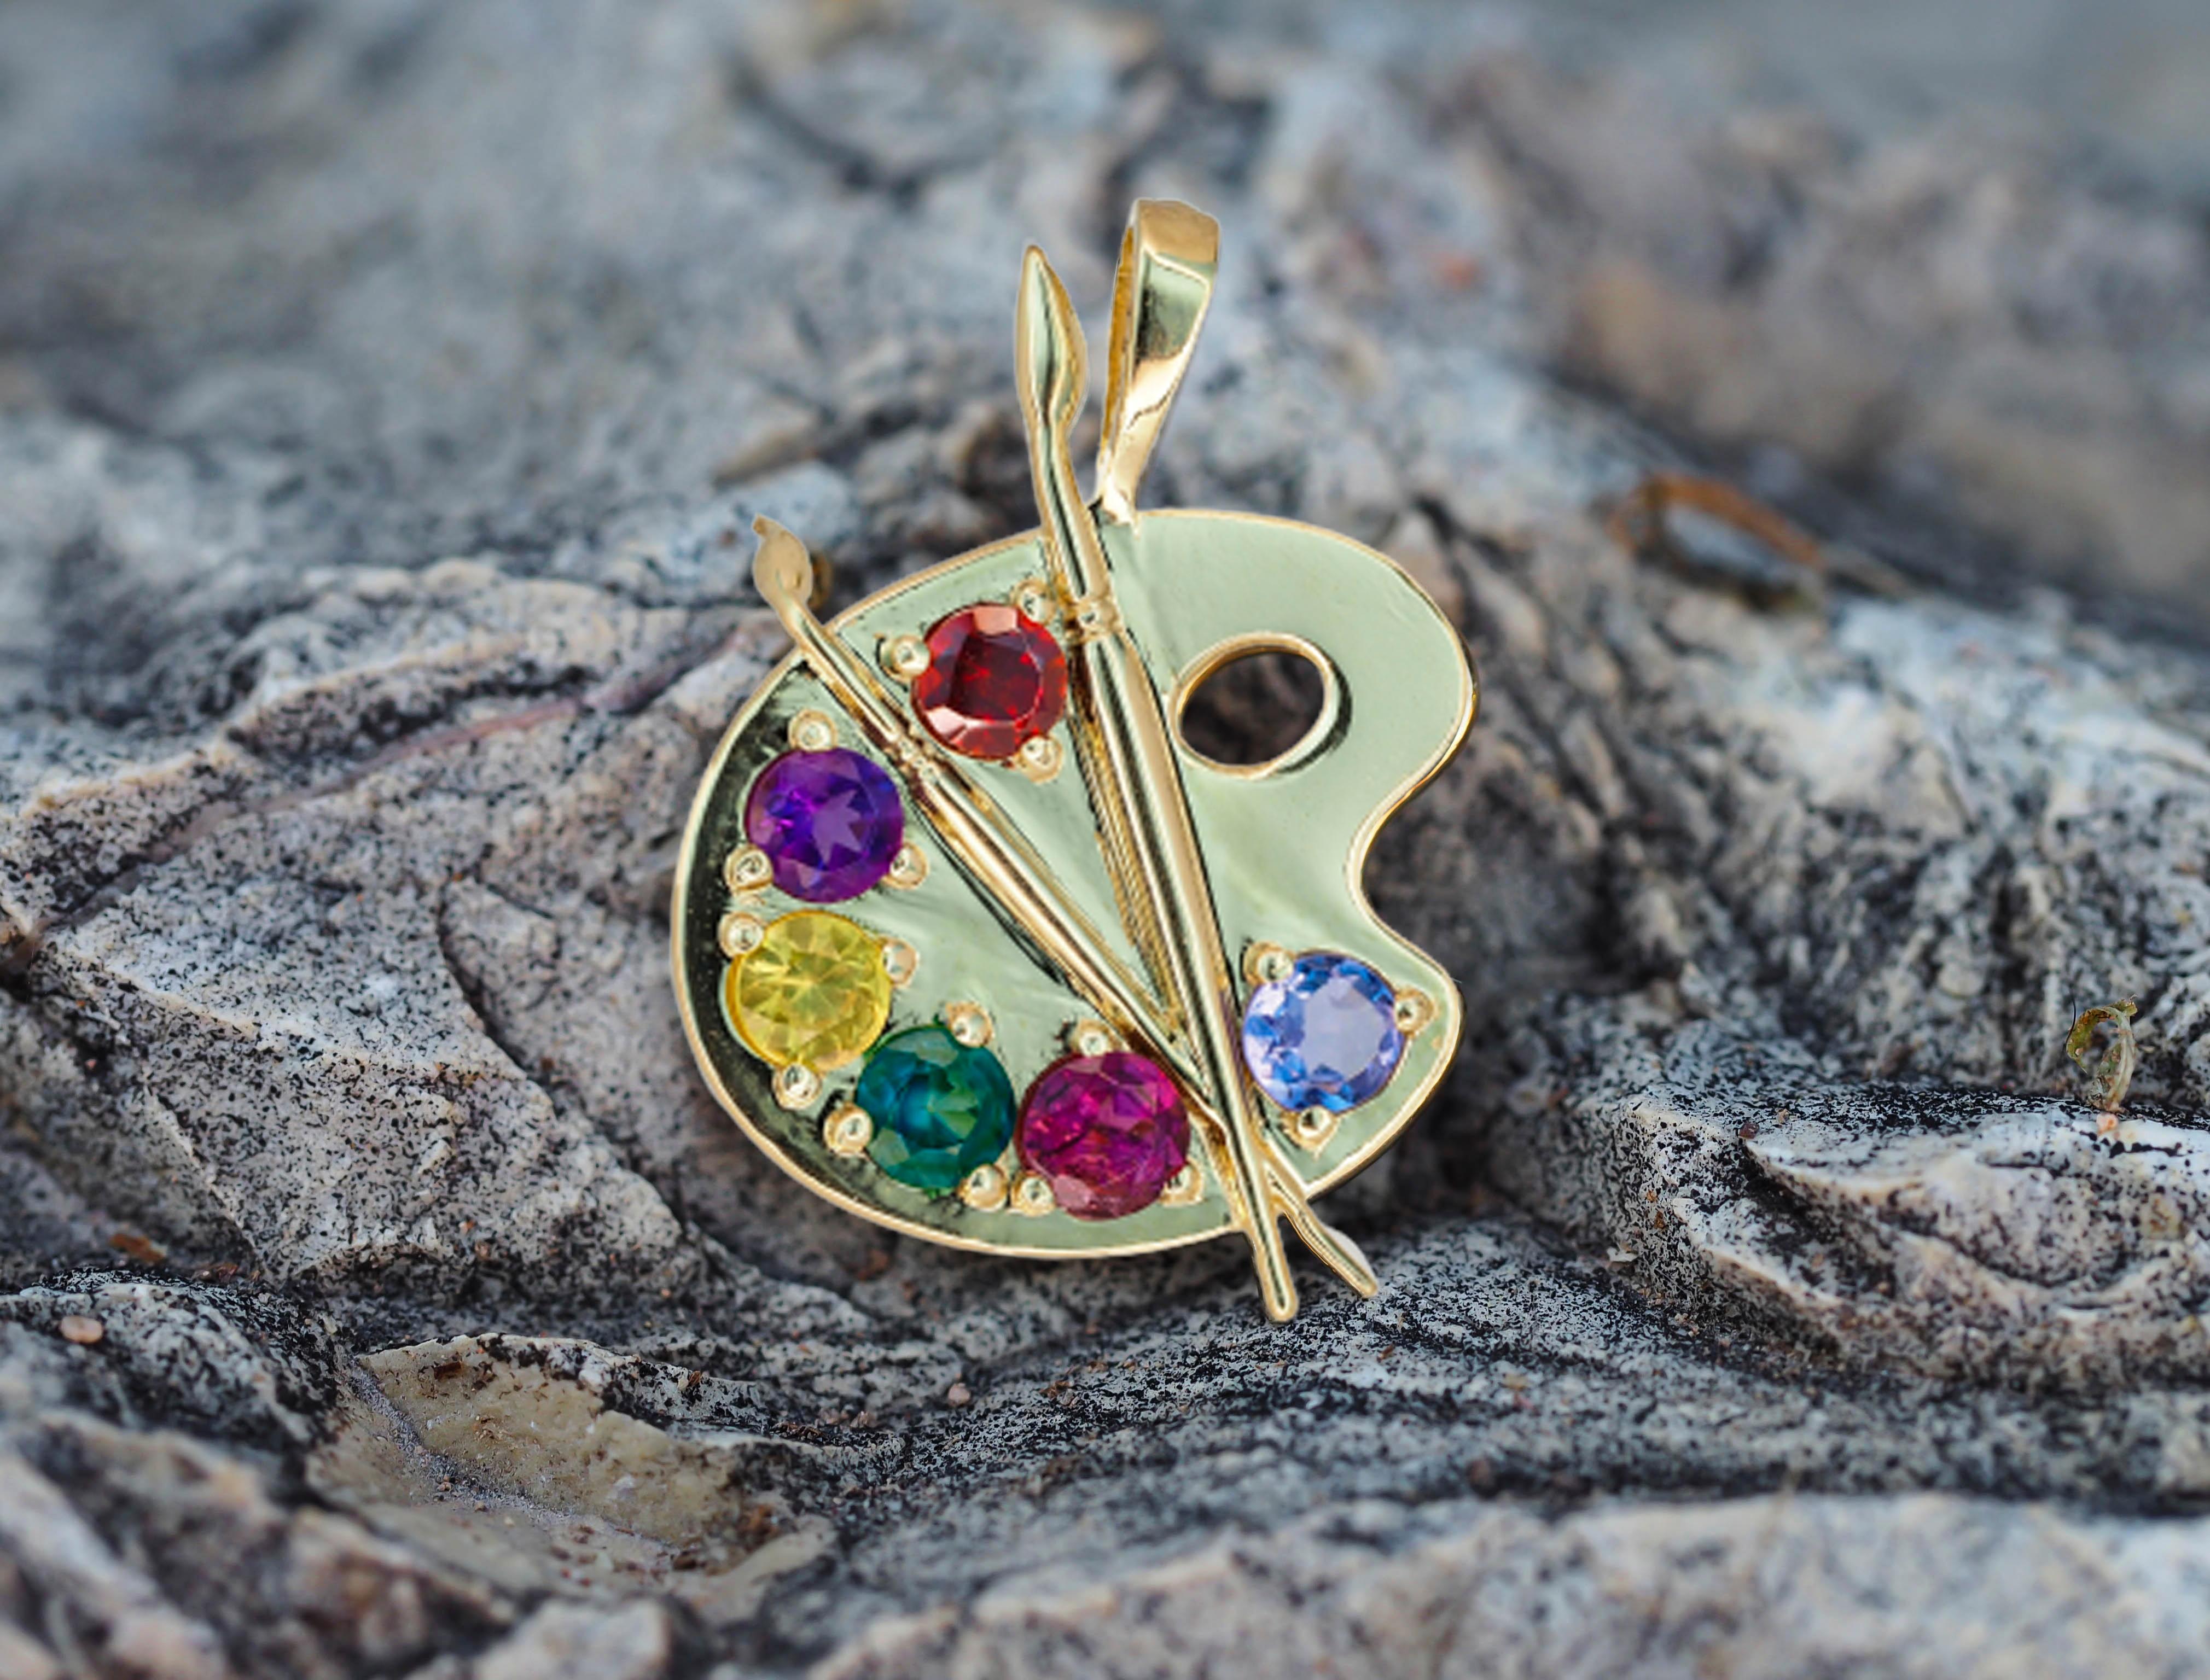 Palette with Paints 14k Gold Pendant with Colored Stones For Sale 4